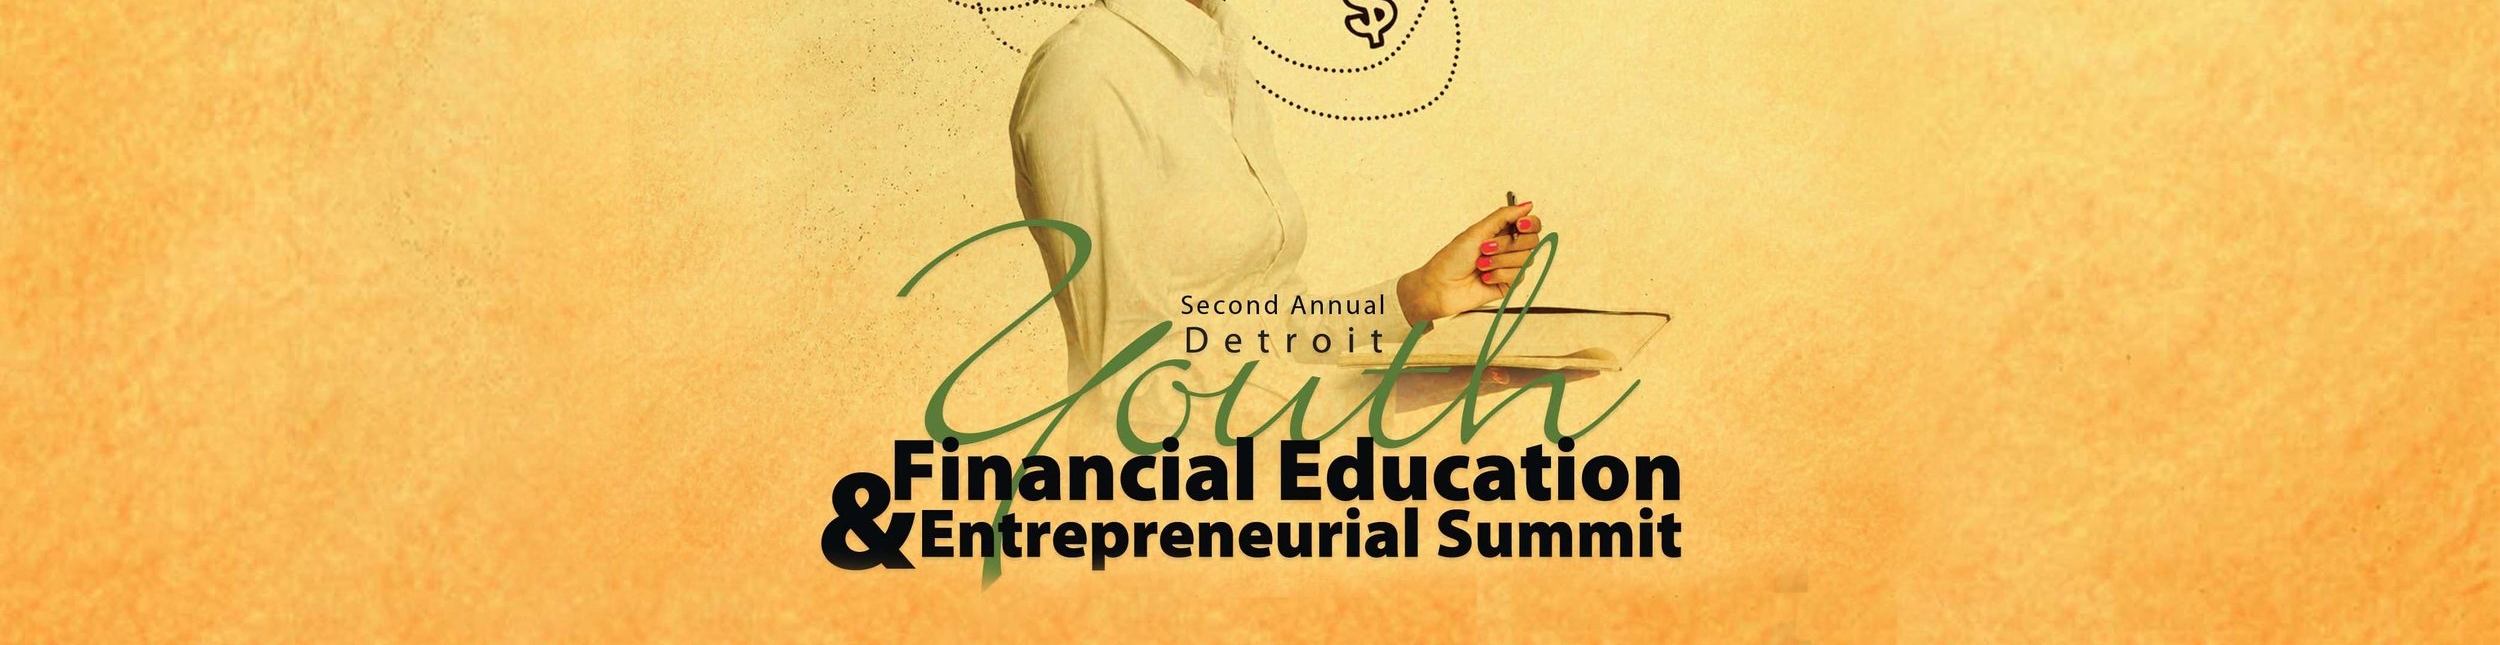 A-Z Guidelines About Financial Education For Entrepreneurs